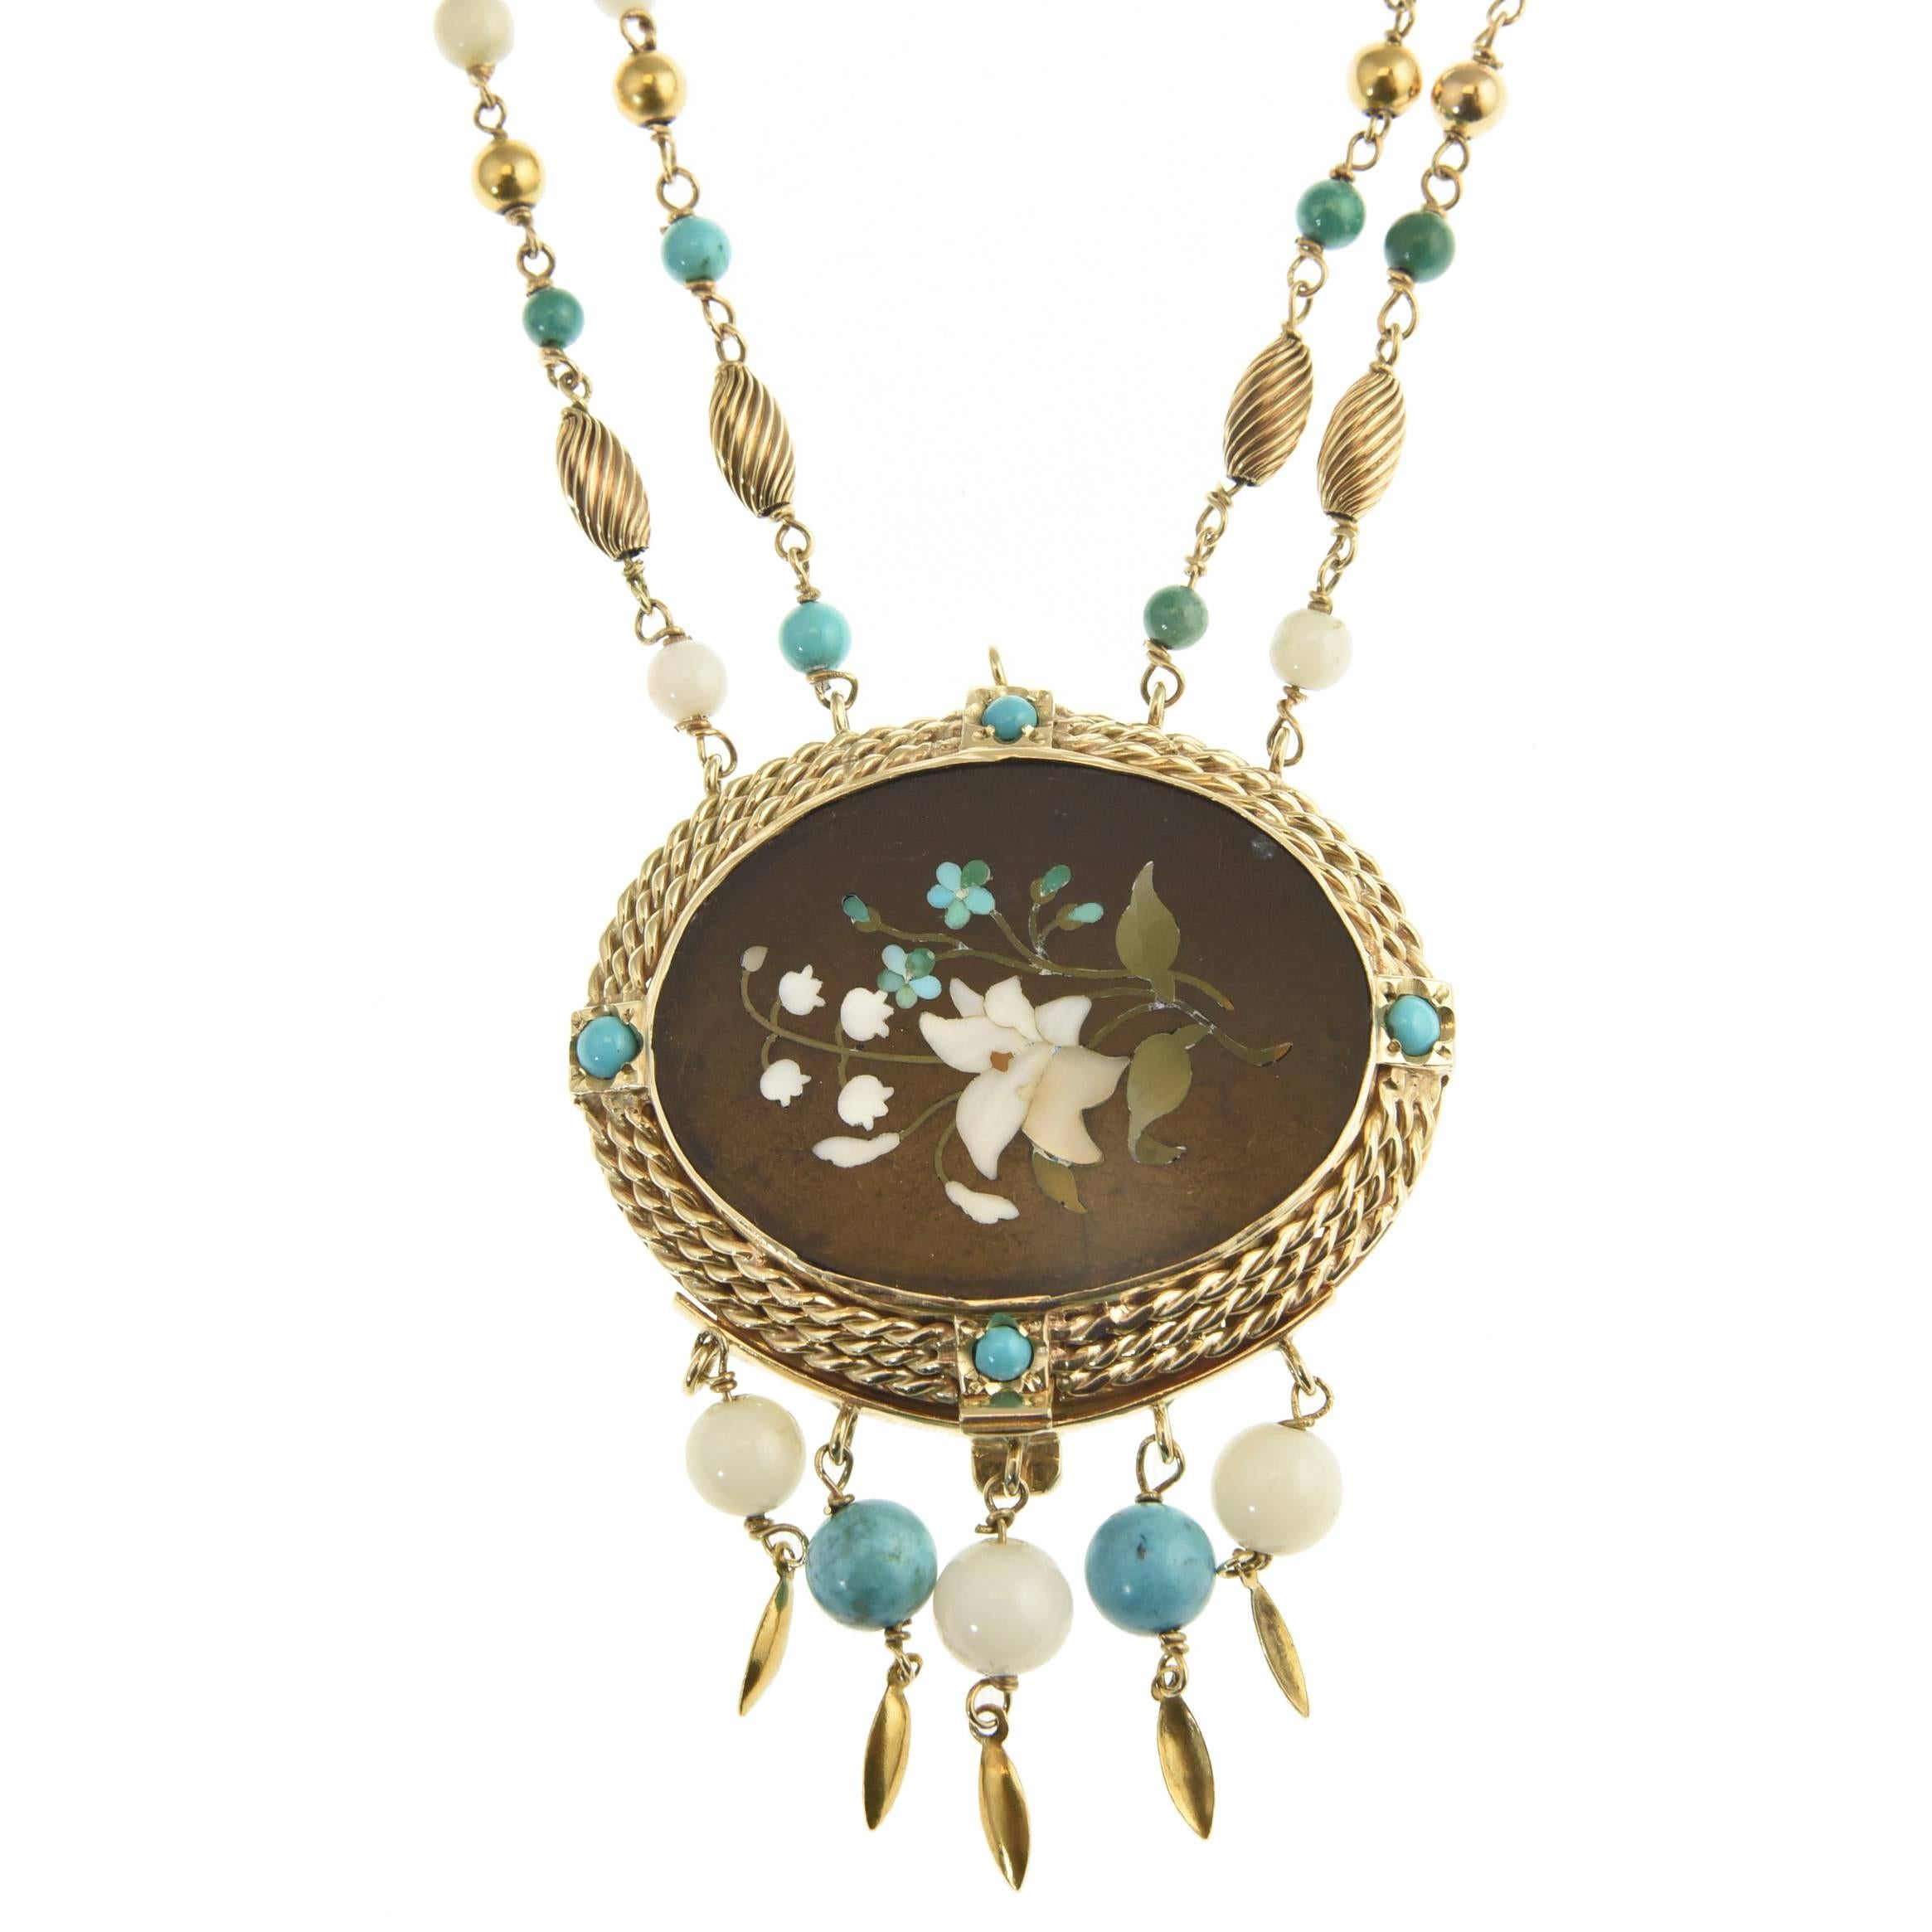 Cleopatra Inspired Turquoise and Gold Necklace with Victorian Pietra Dura Clasp